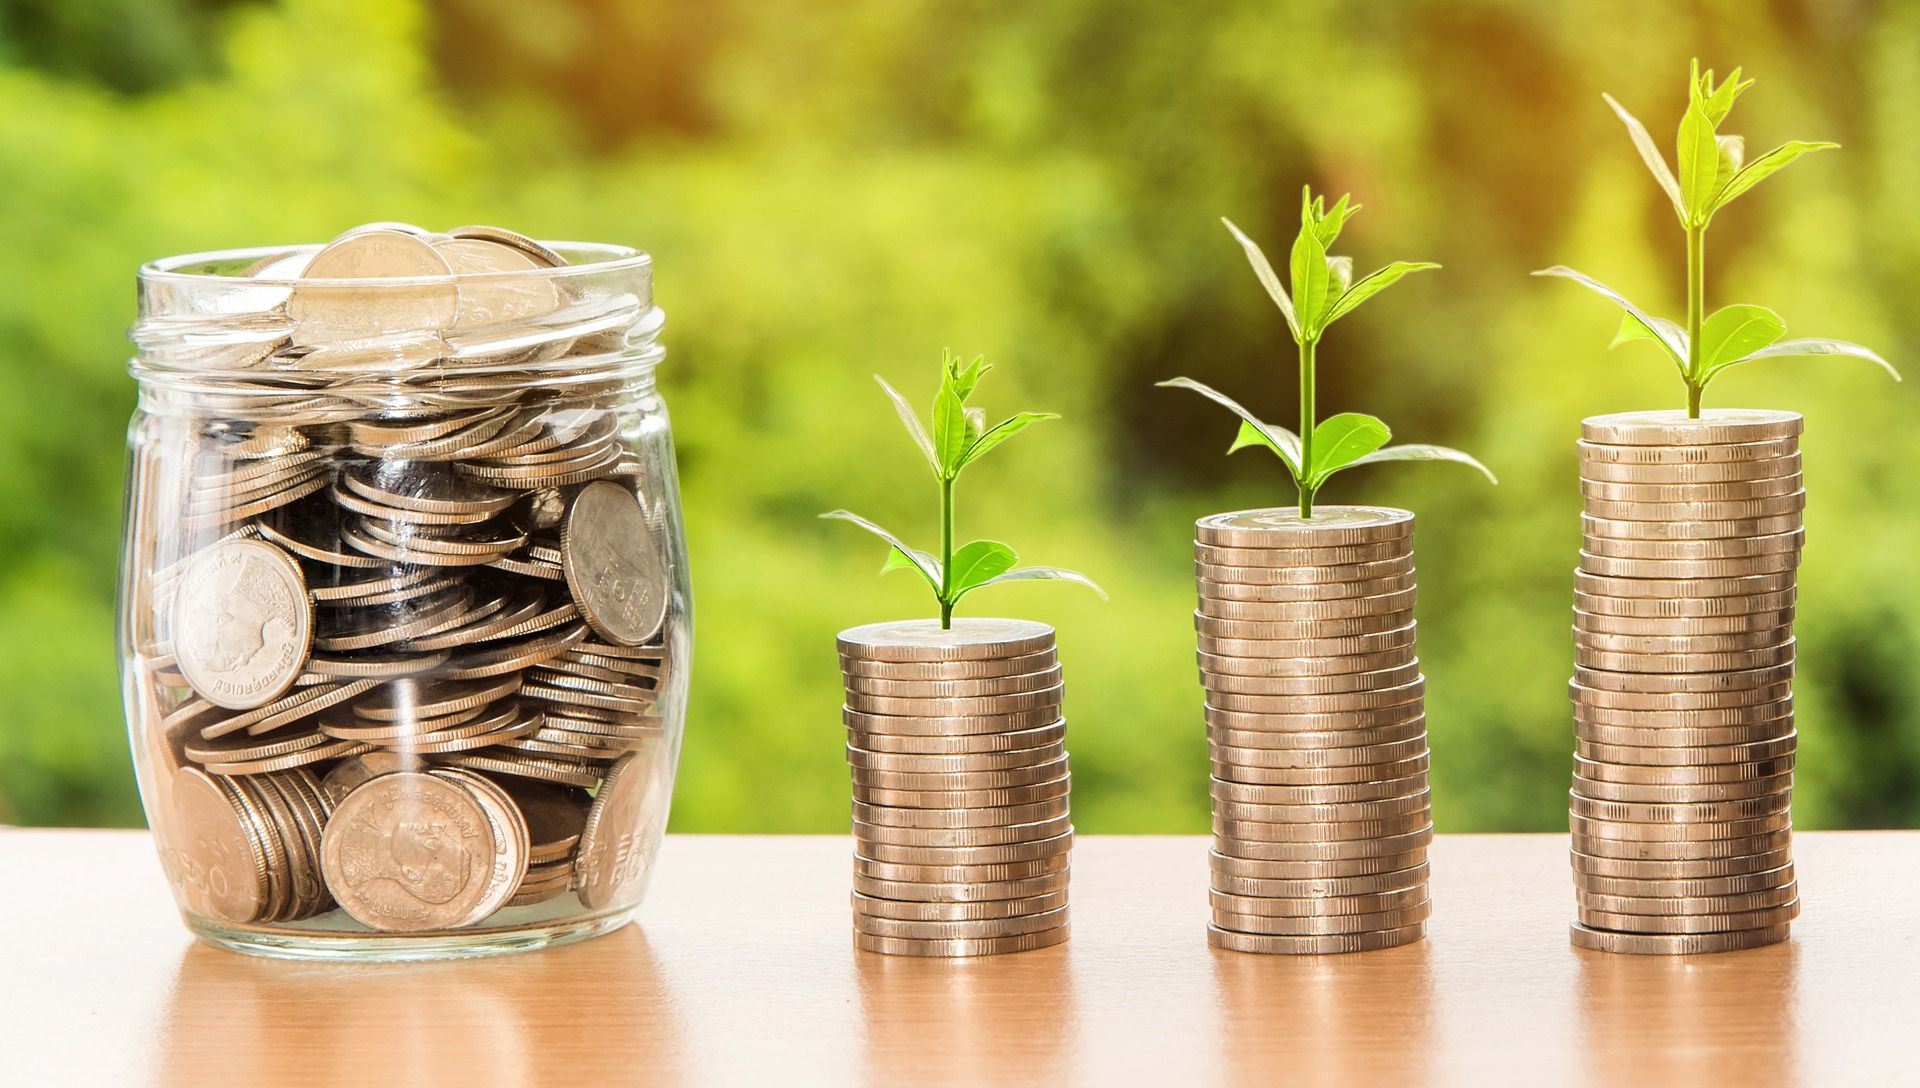 Coins in a jar next to stacked up coins with small plants sprouting out of them. | Source: Shutterstock